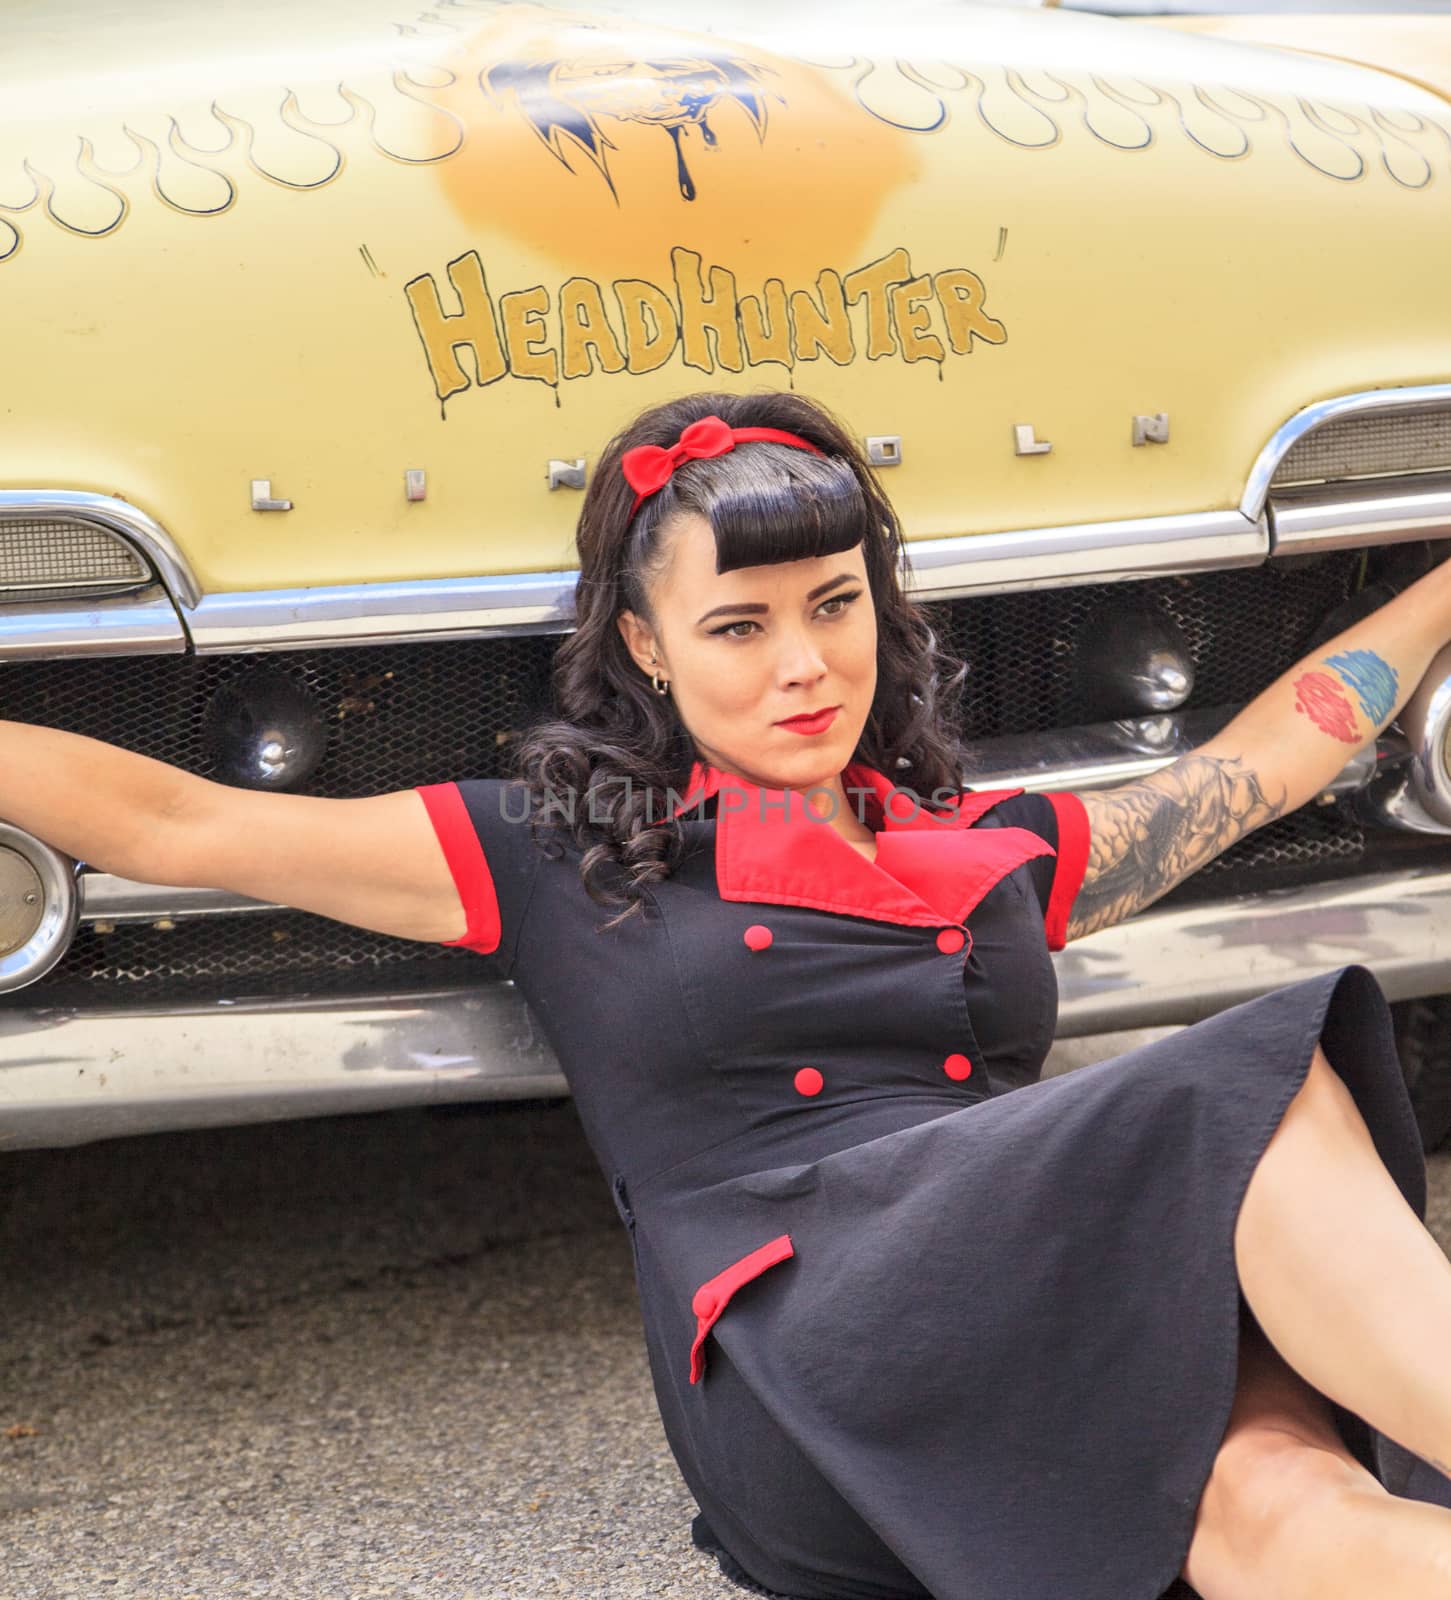 THORNCLIFF CALGARY CANADA, SEPT 13 2014: The annual Show and Shine with Pin Up Girls "Cars before 1964"